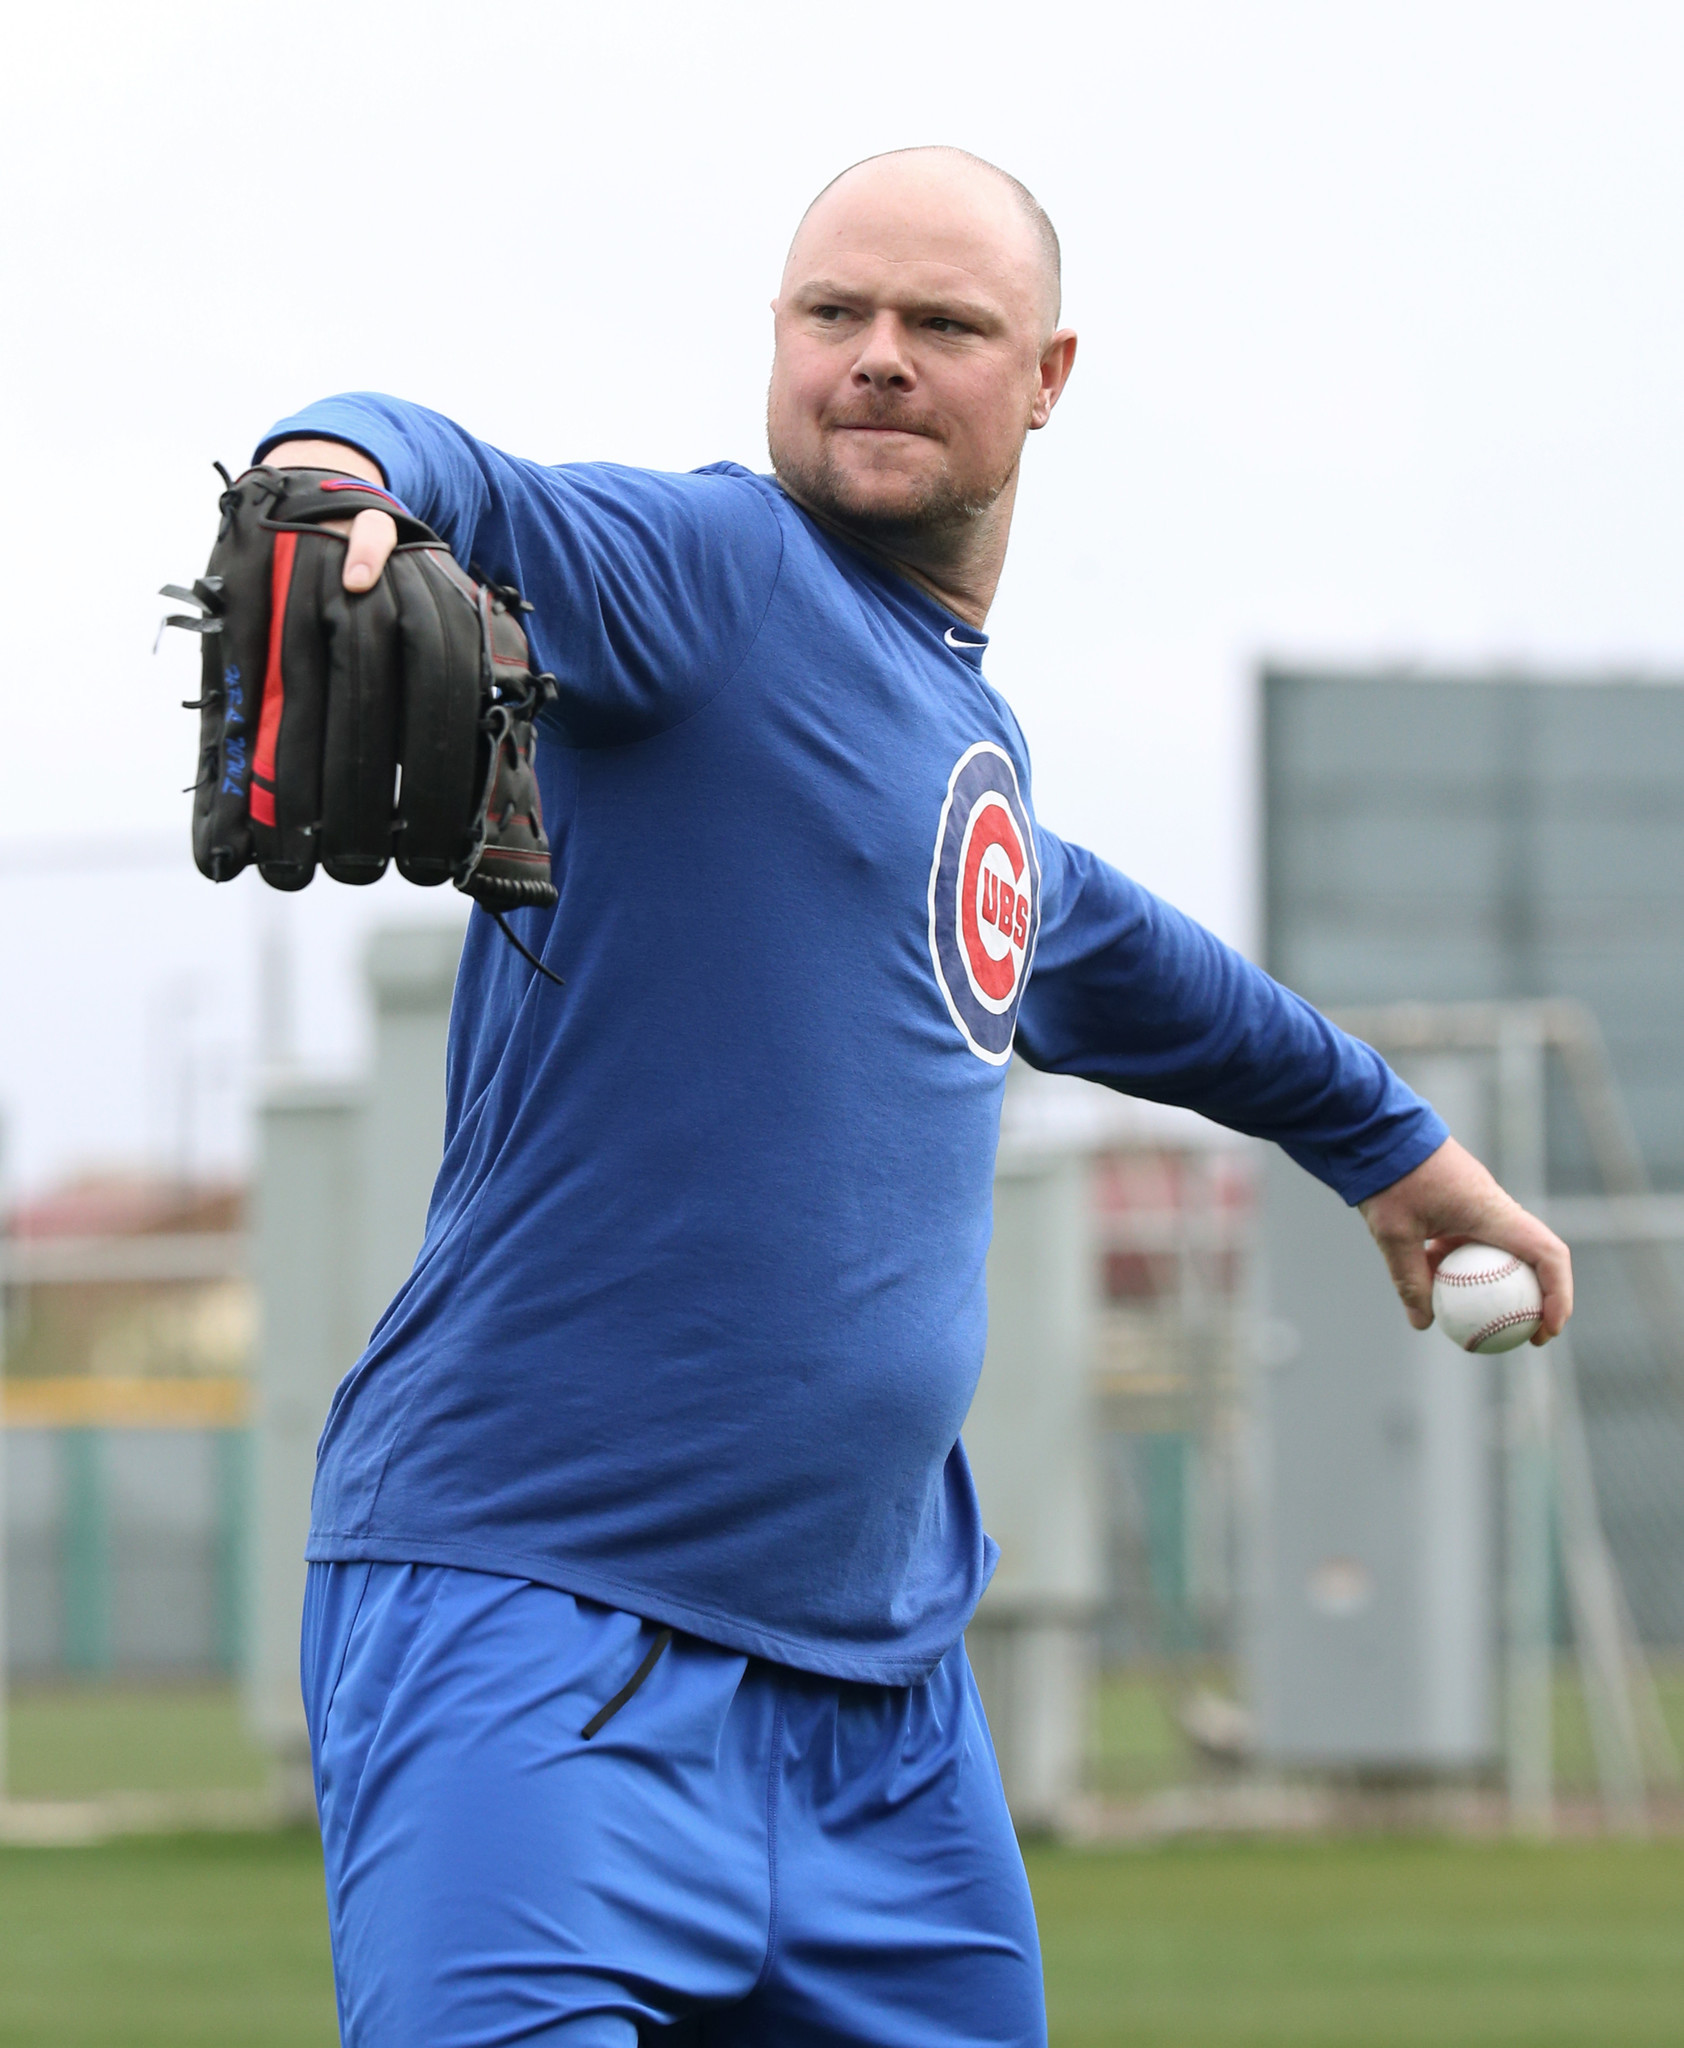 Take it easy? Jon Lester pushes himself with titles, teammates in mind - Chicago Tribune